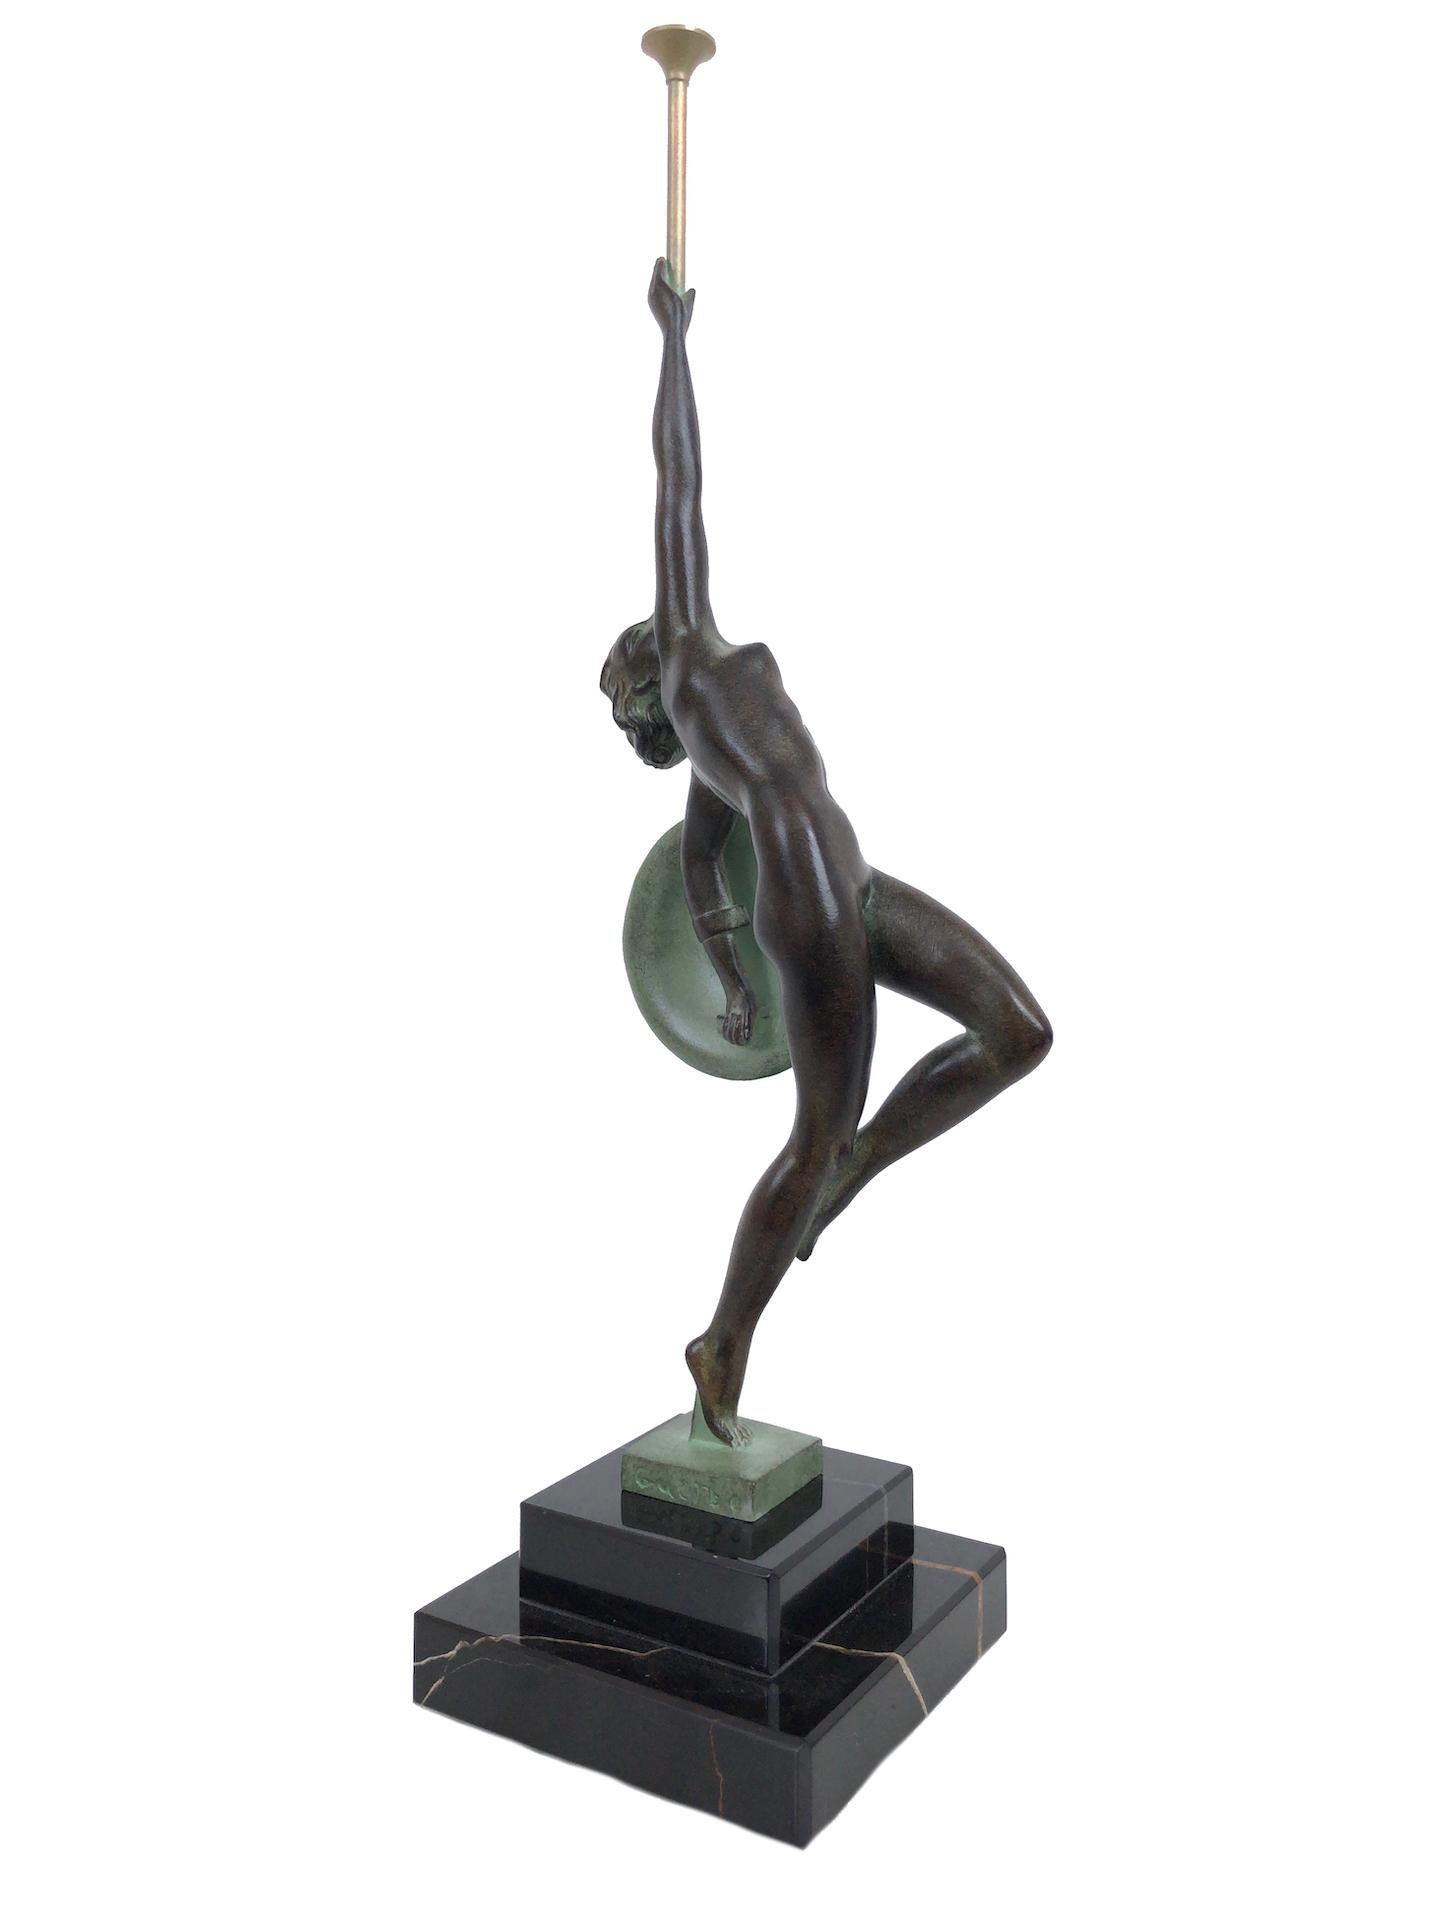 Contemporary Amazone Sculpture in Spelter, Jericho by Guerbe, Original Max Le Verrier